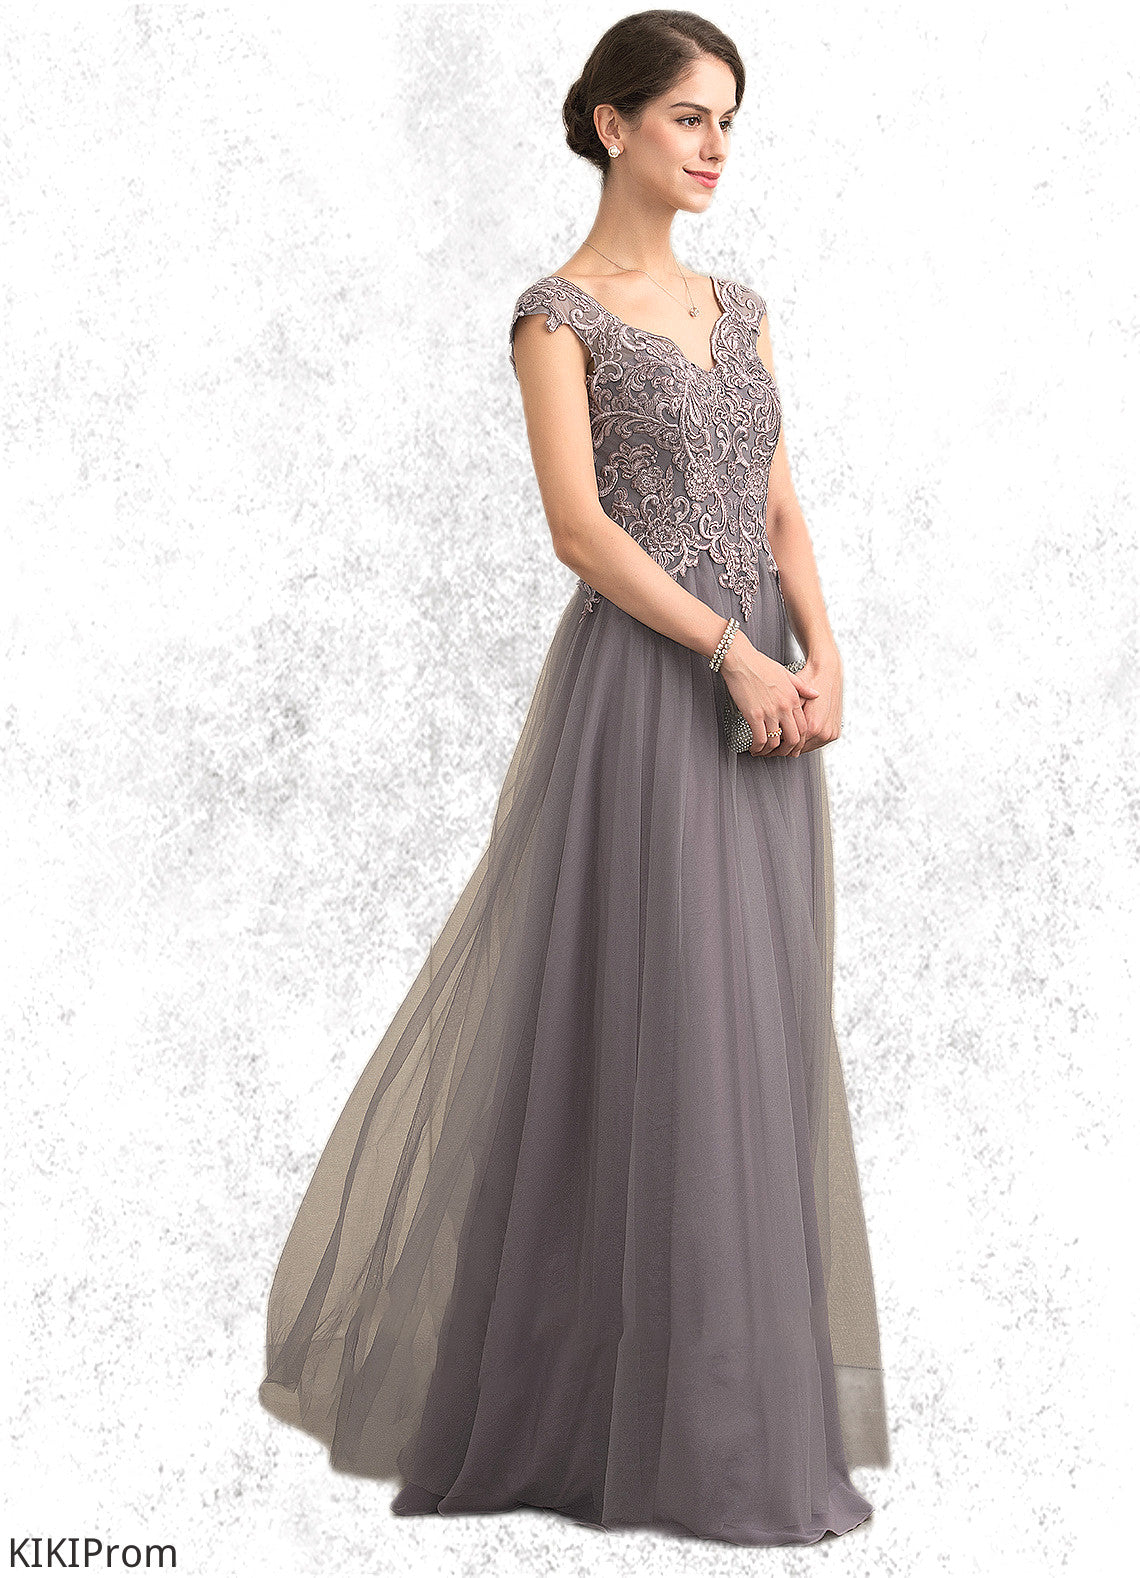 Shyann A-Line/Princess V-neck Floor-Length Tulle Lace Mother of the Bride Dress With Sequins DZ126P0014985